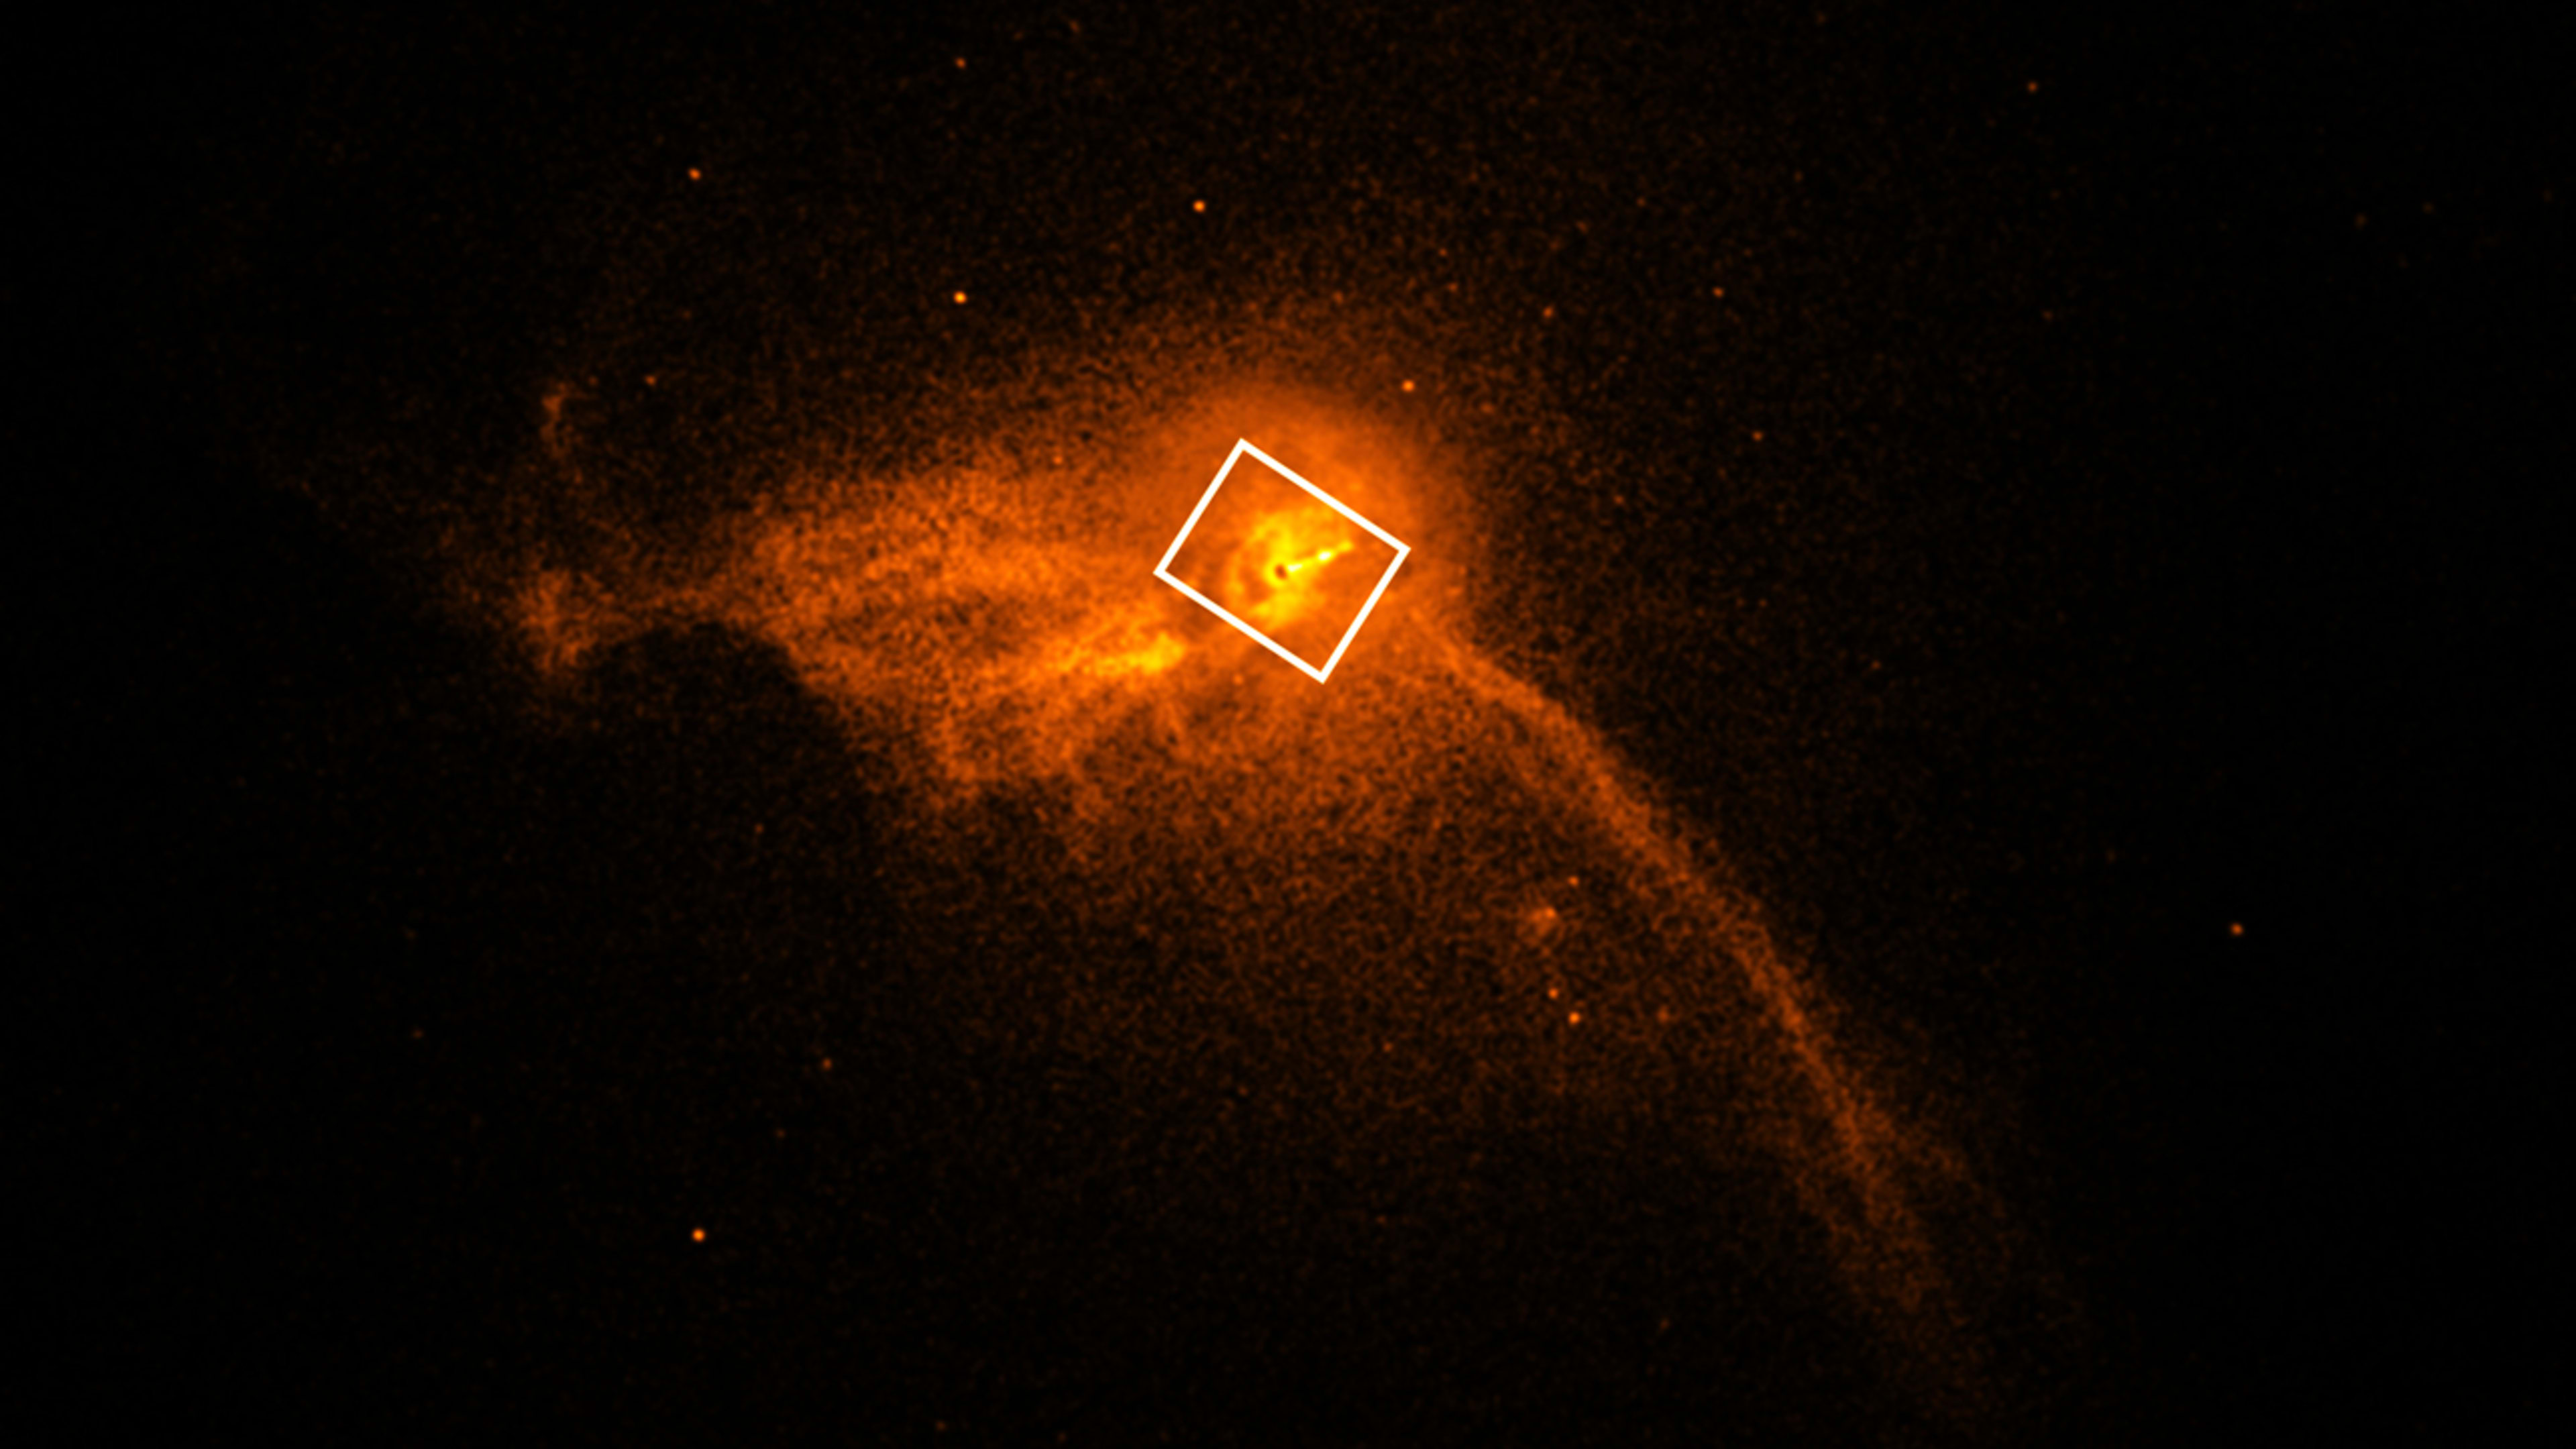 Here’s the first-ever image of a black hole